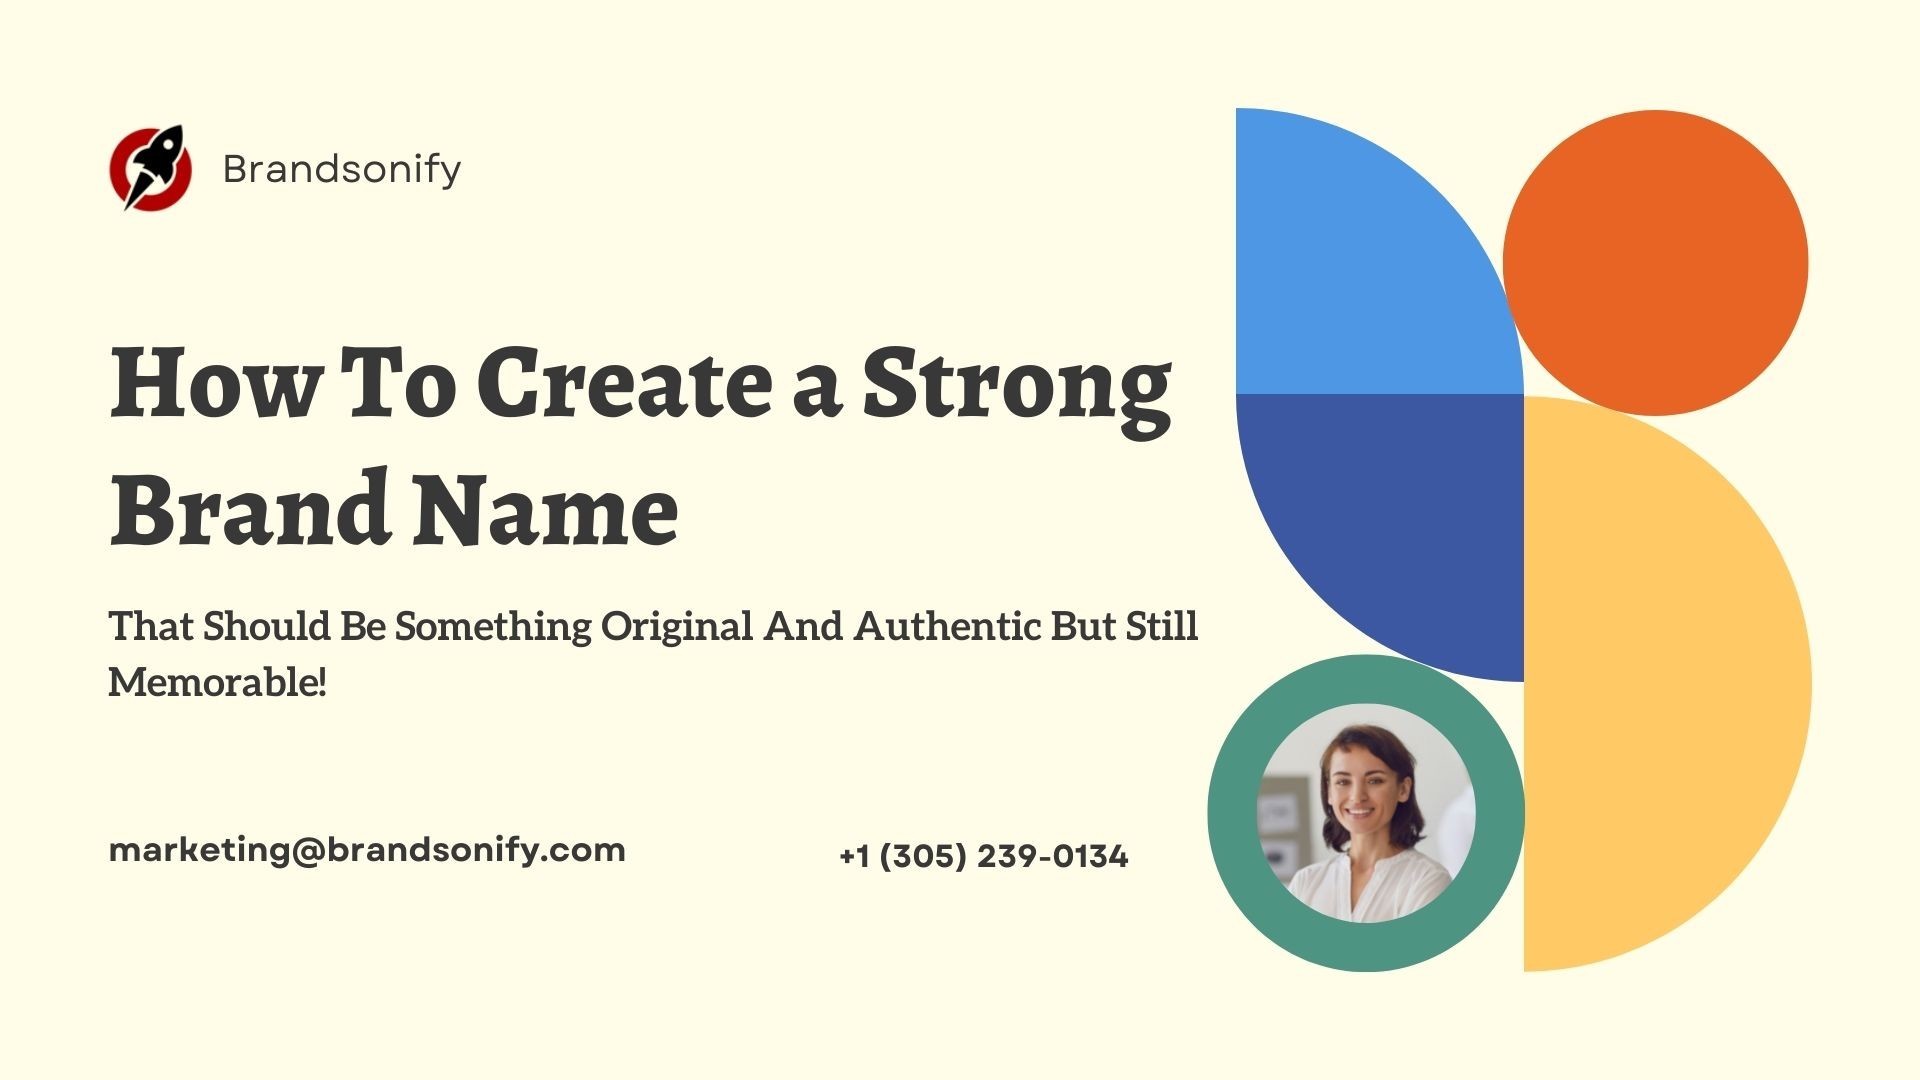 How To Create A Strong Brand Name!